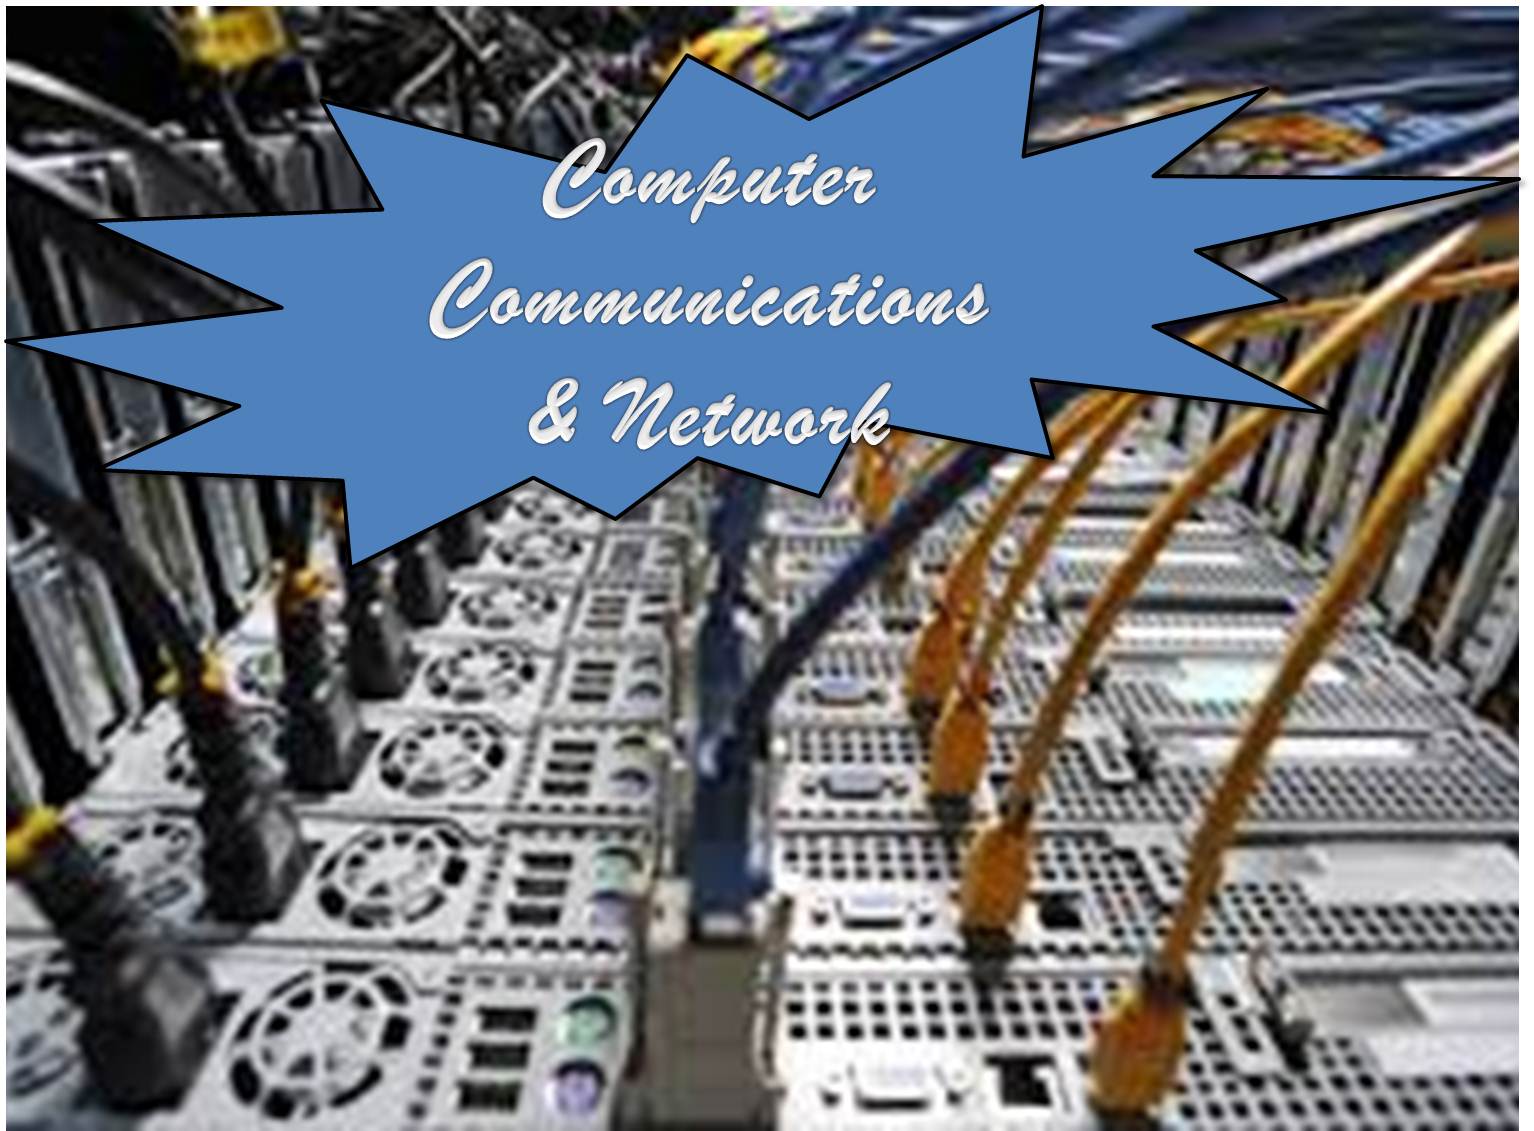 http://study.aisectonline.com/images/Computer Communication and Networks.jpg